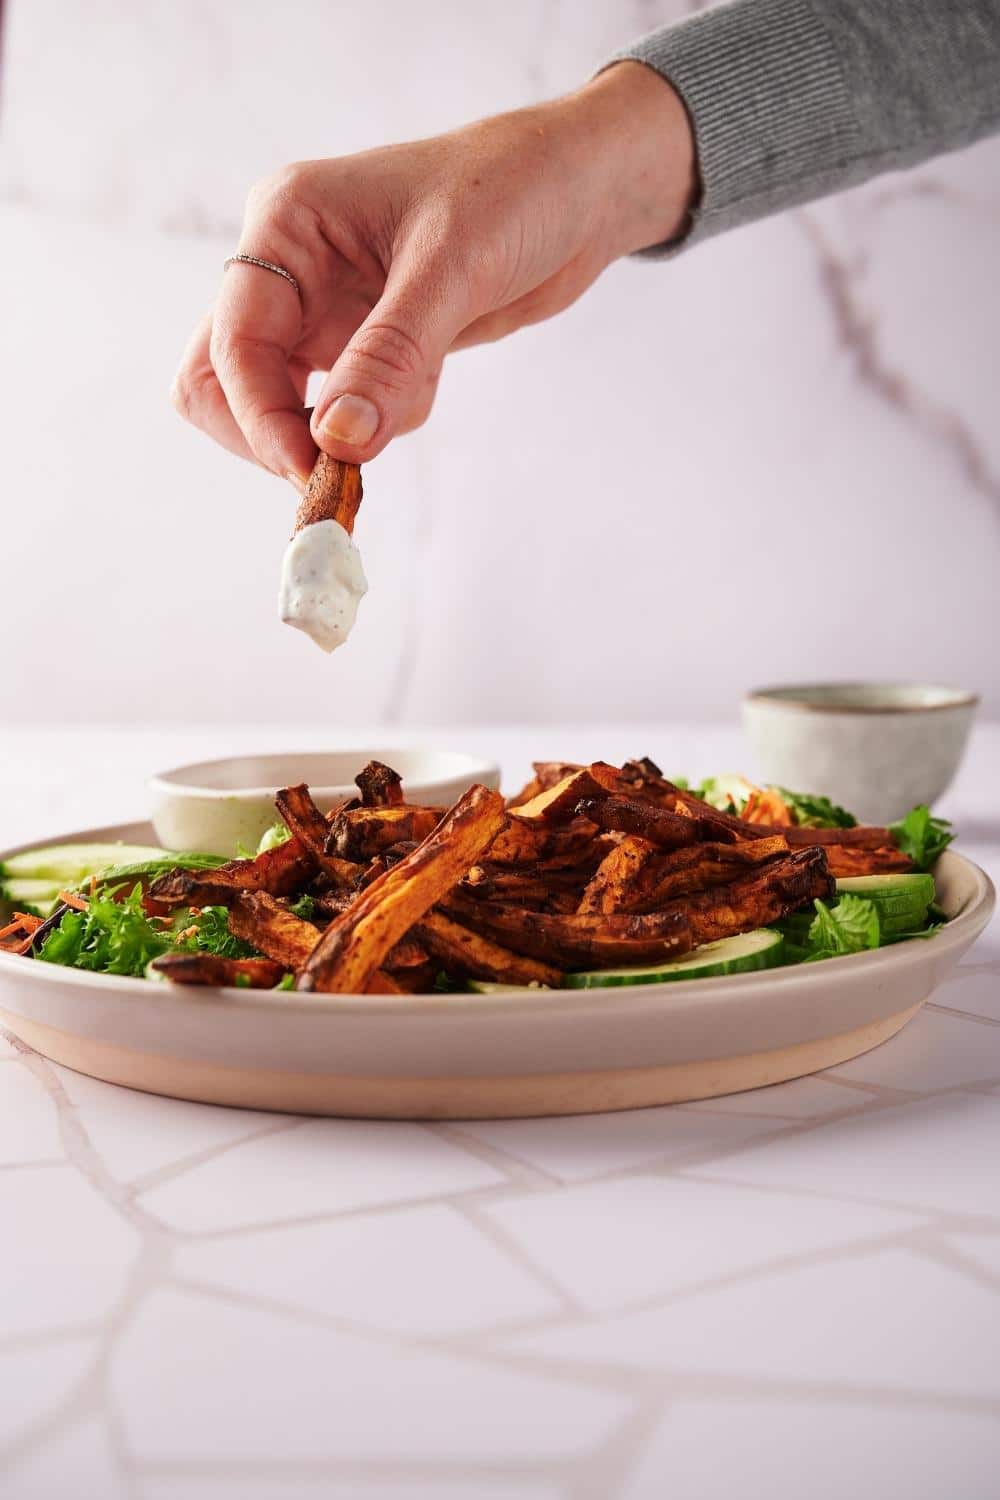 A hand dipping a sweet potato fry into a bowl of creamy dipping sauce. The sauce sits on a plate of sweet potato fries laid on a salad of greens and cucumber slices.